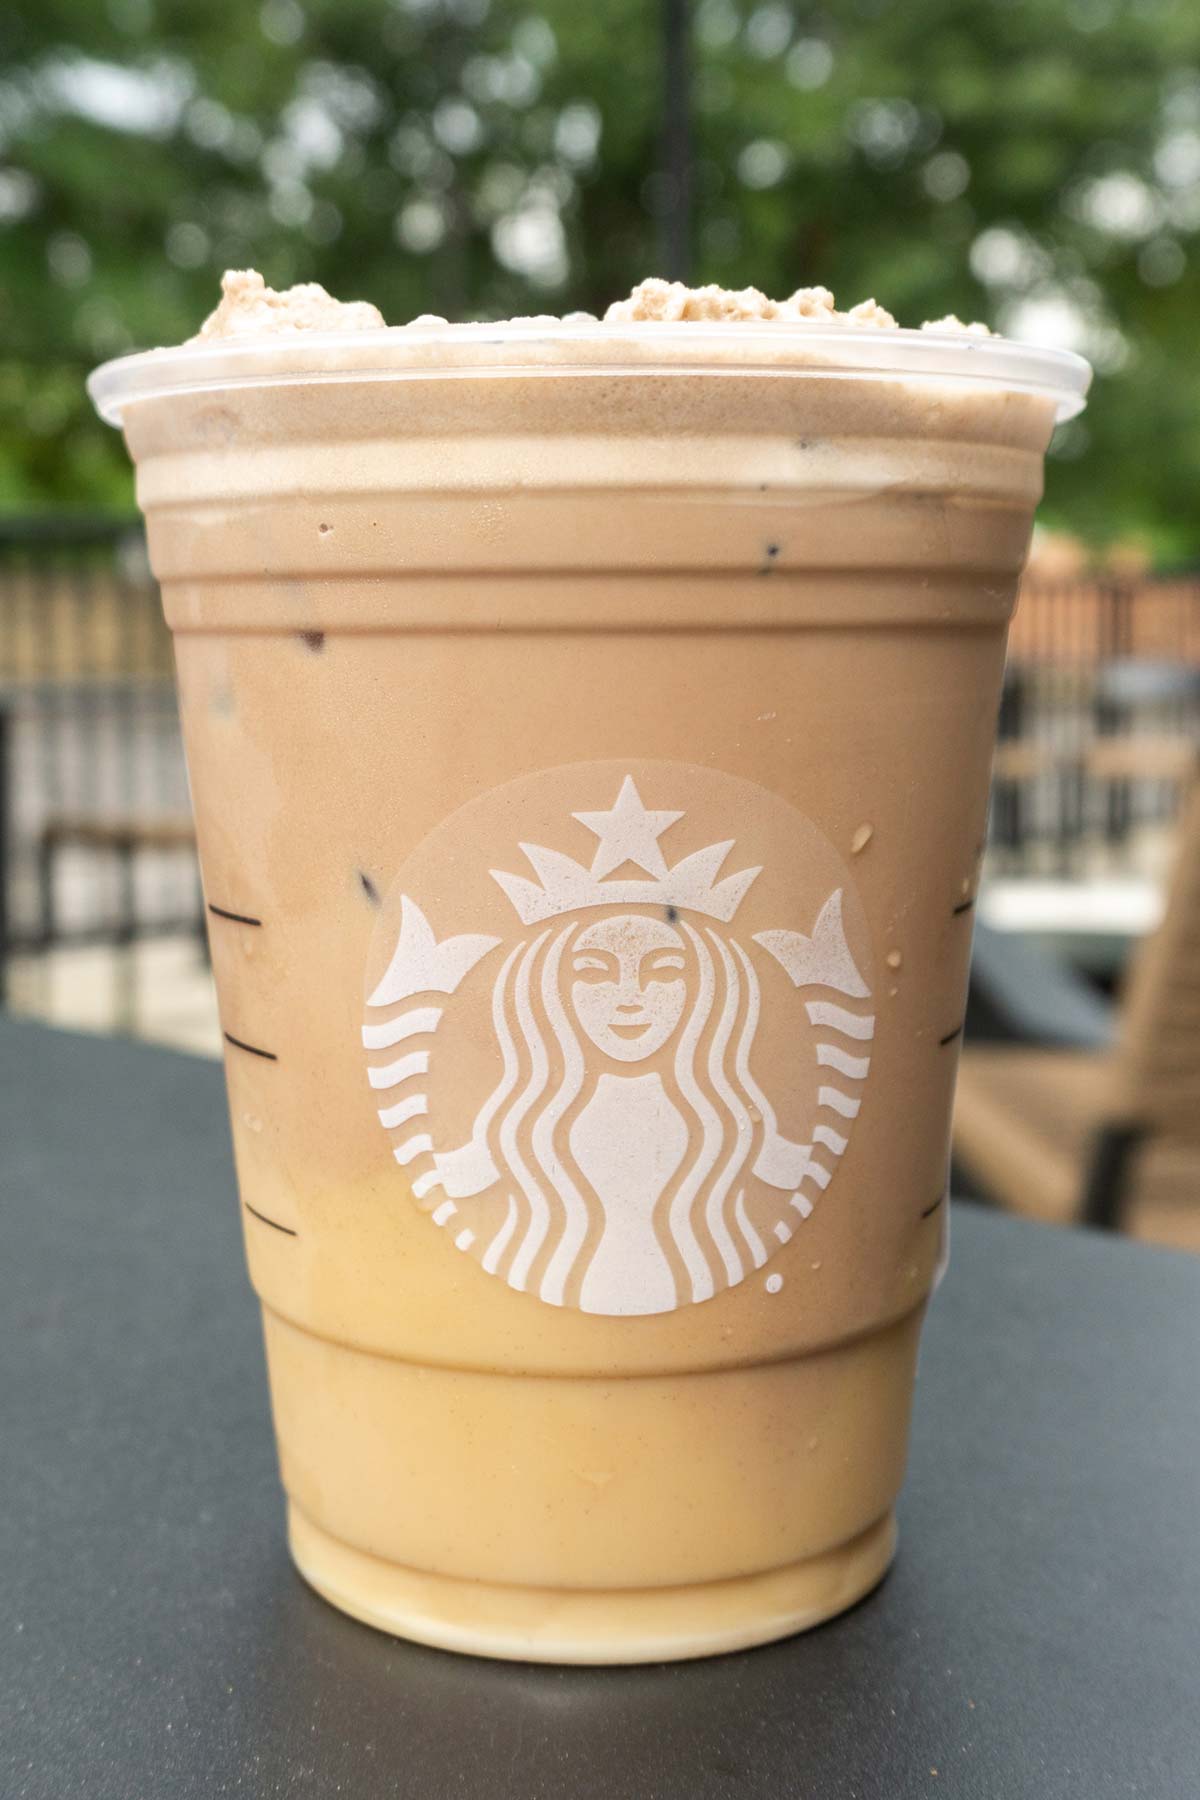 Cookies and Cream Cold Brew, a Starbucks secret menu drink, in a Starbucks cup.